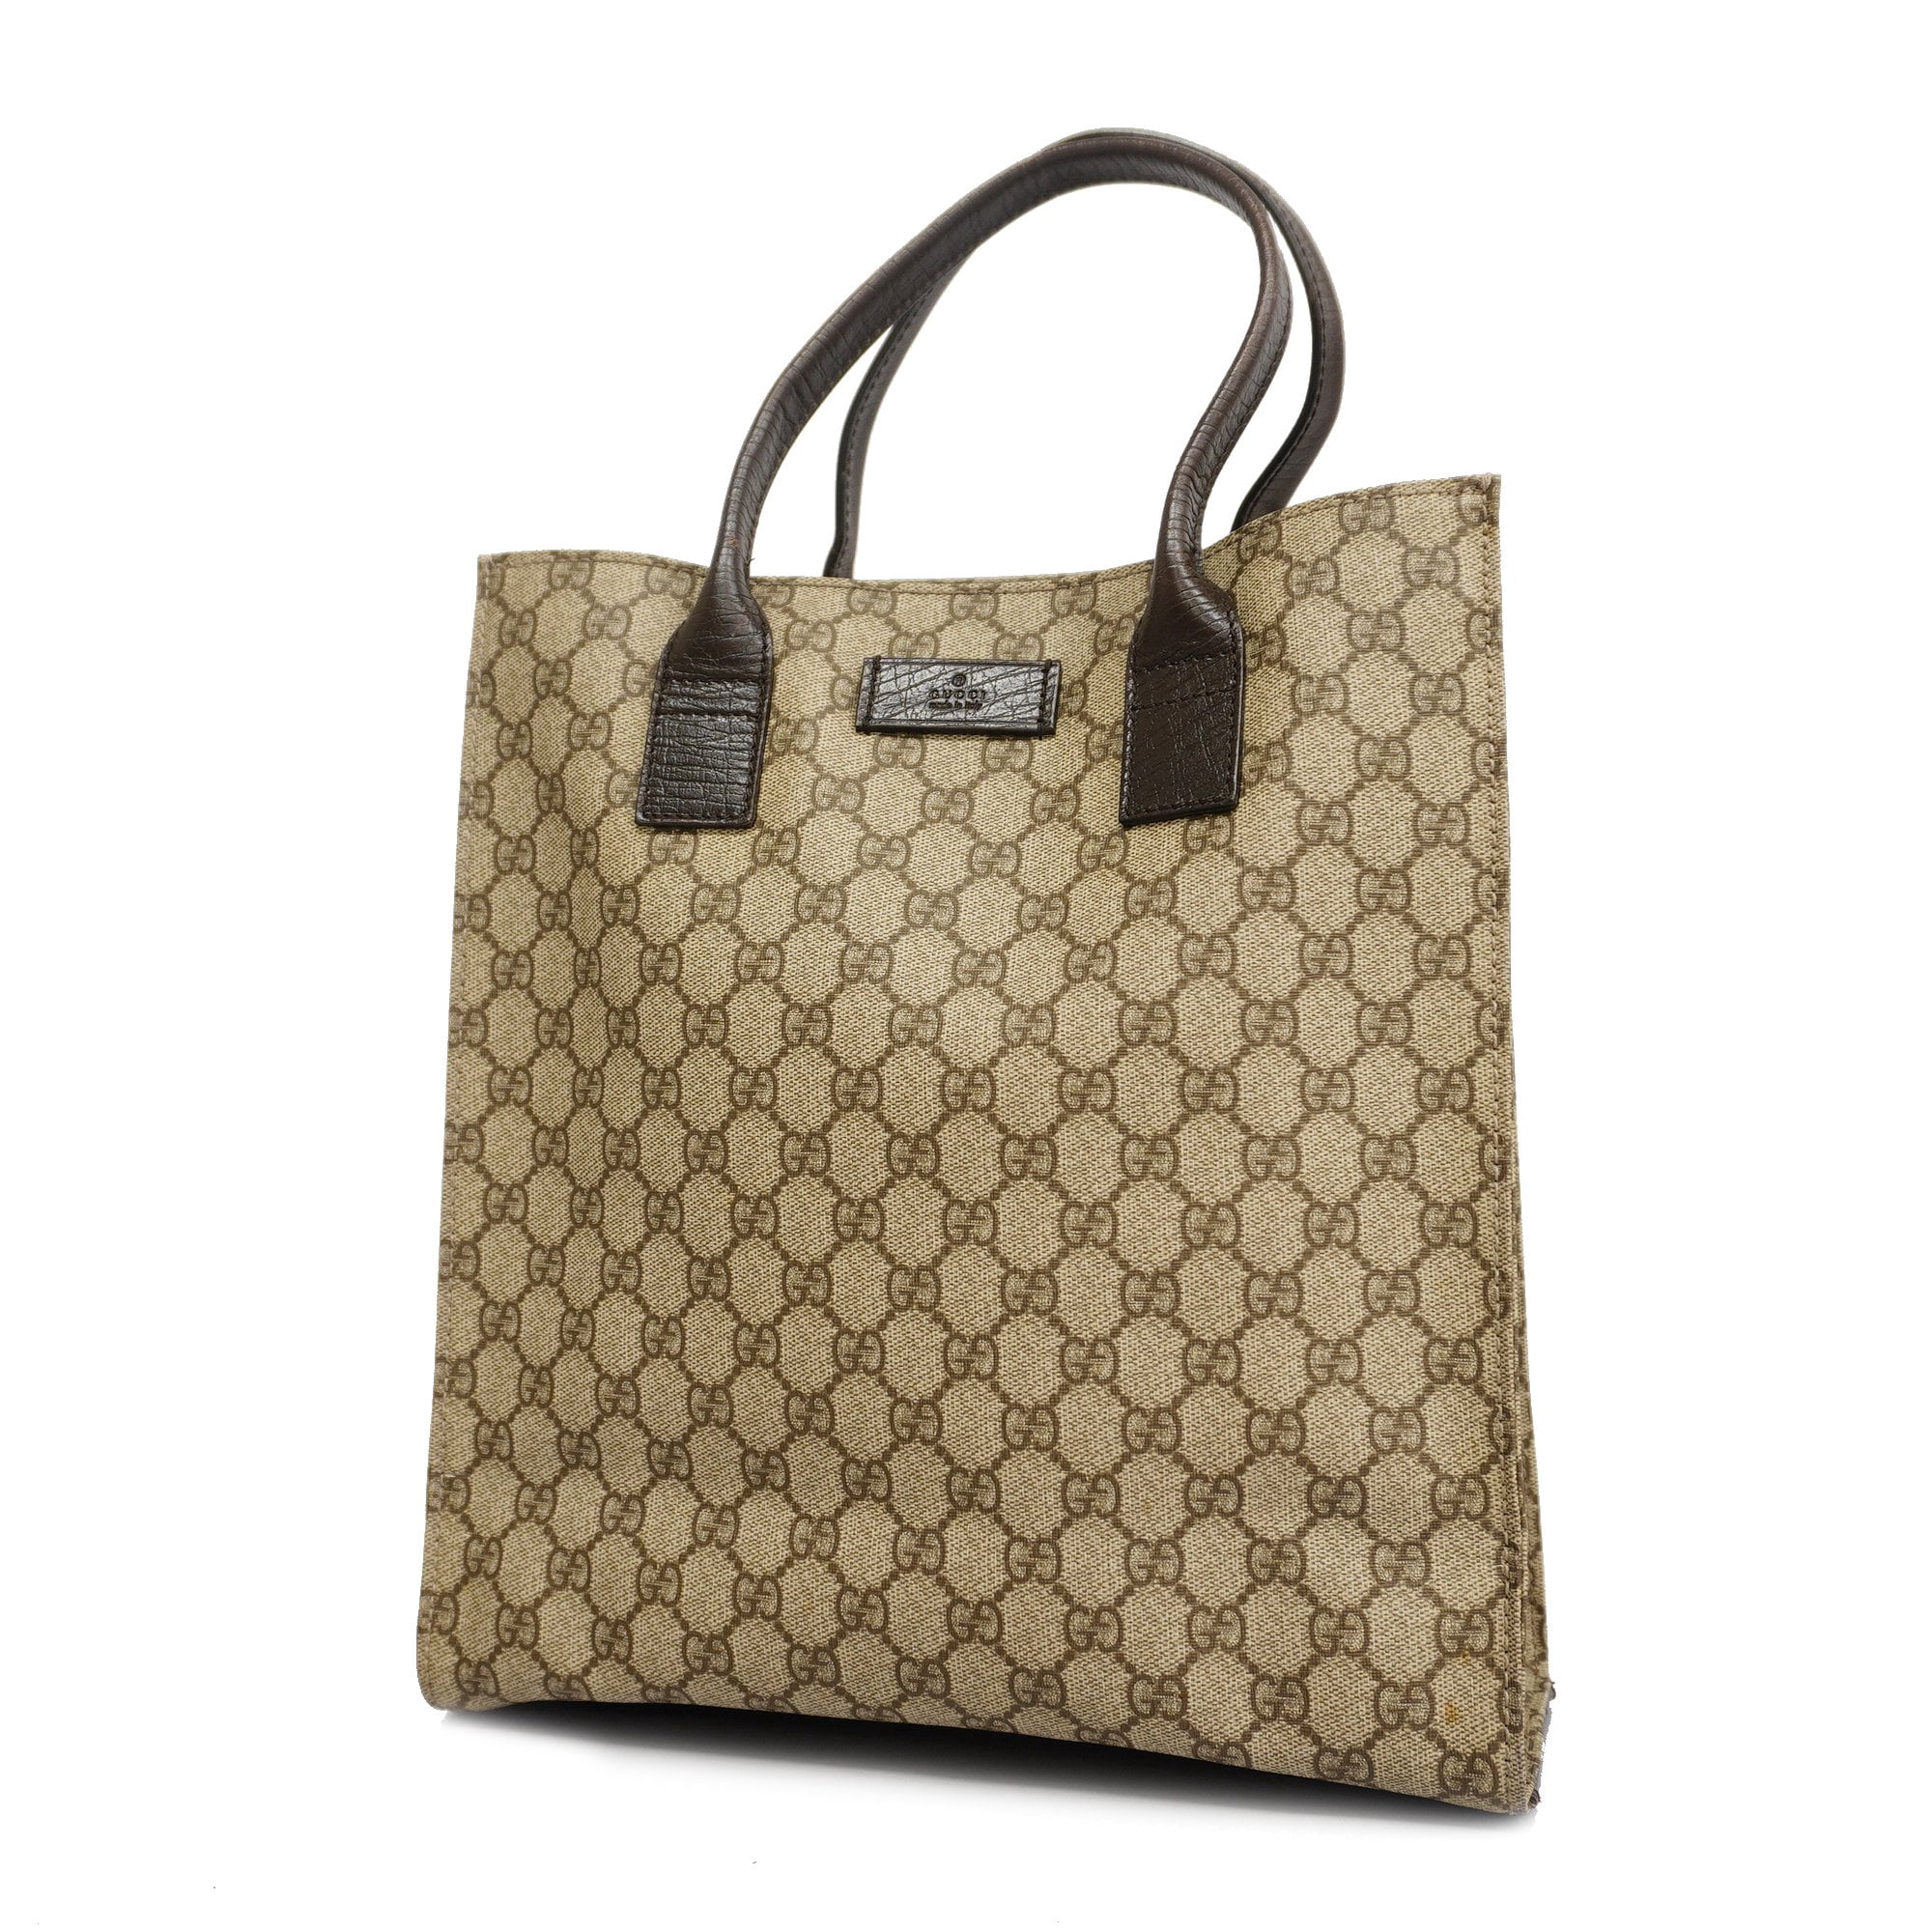 GUCCI-GG-Supreme-Leather-Tote-Bag-Beige-Brown-91249 – dct